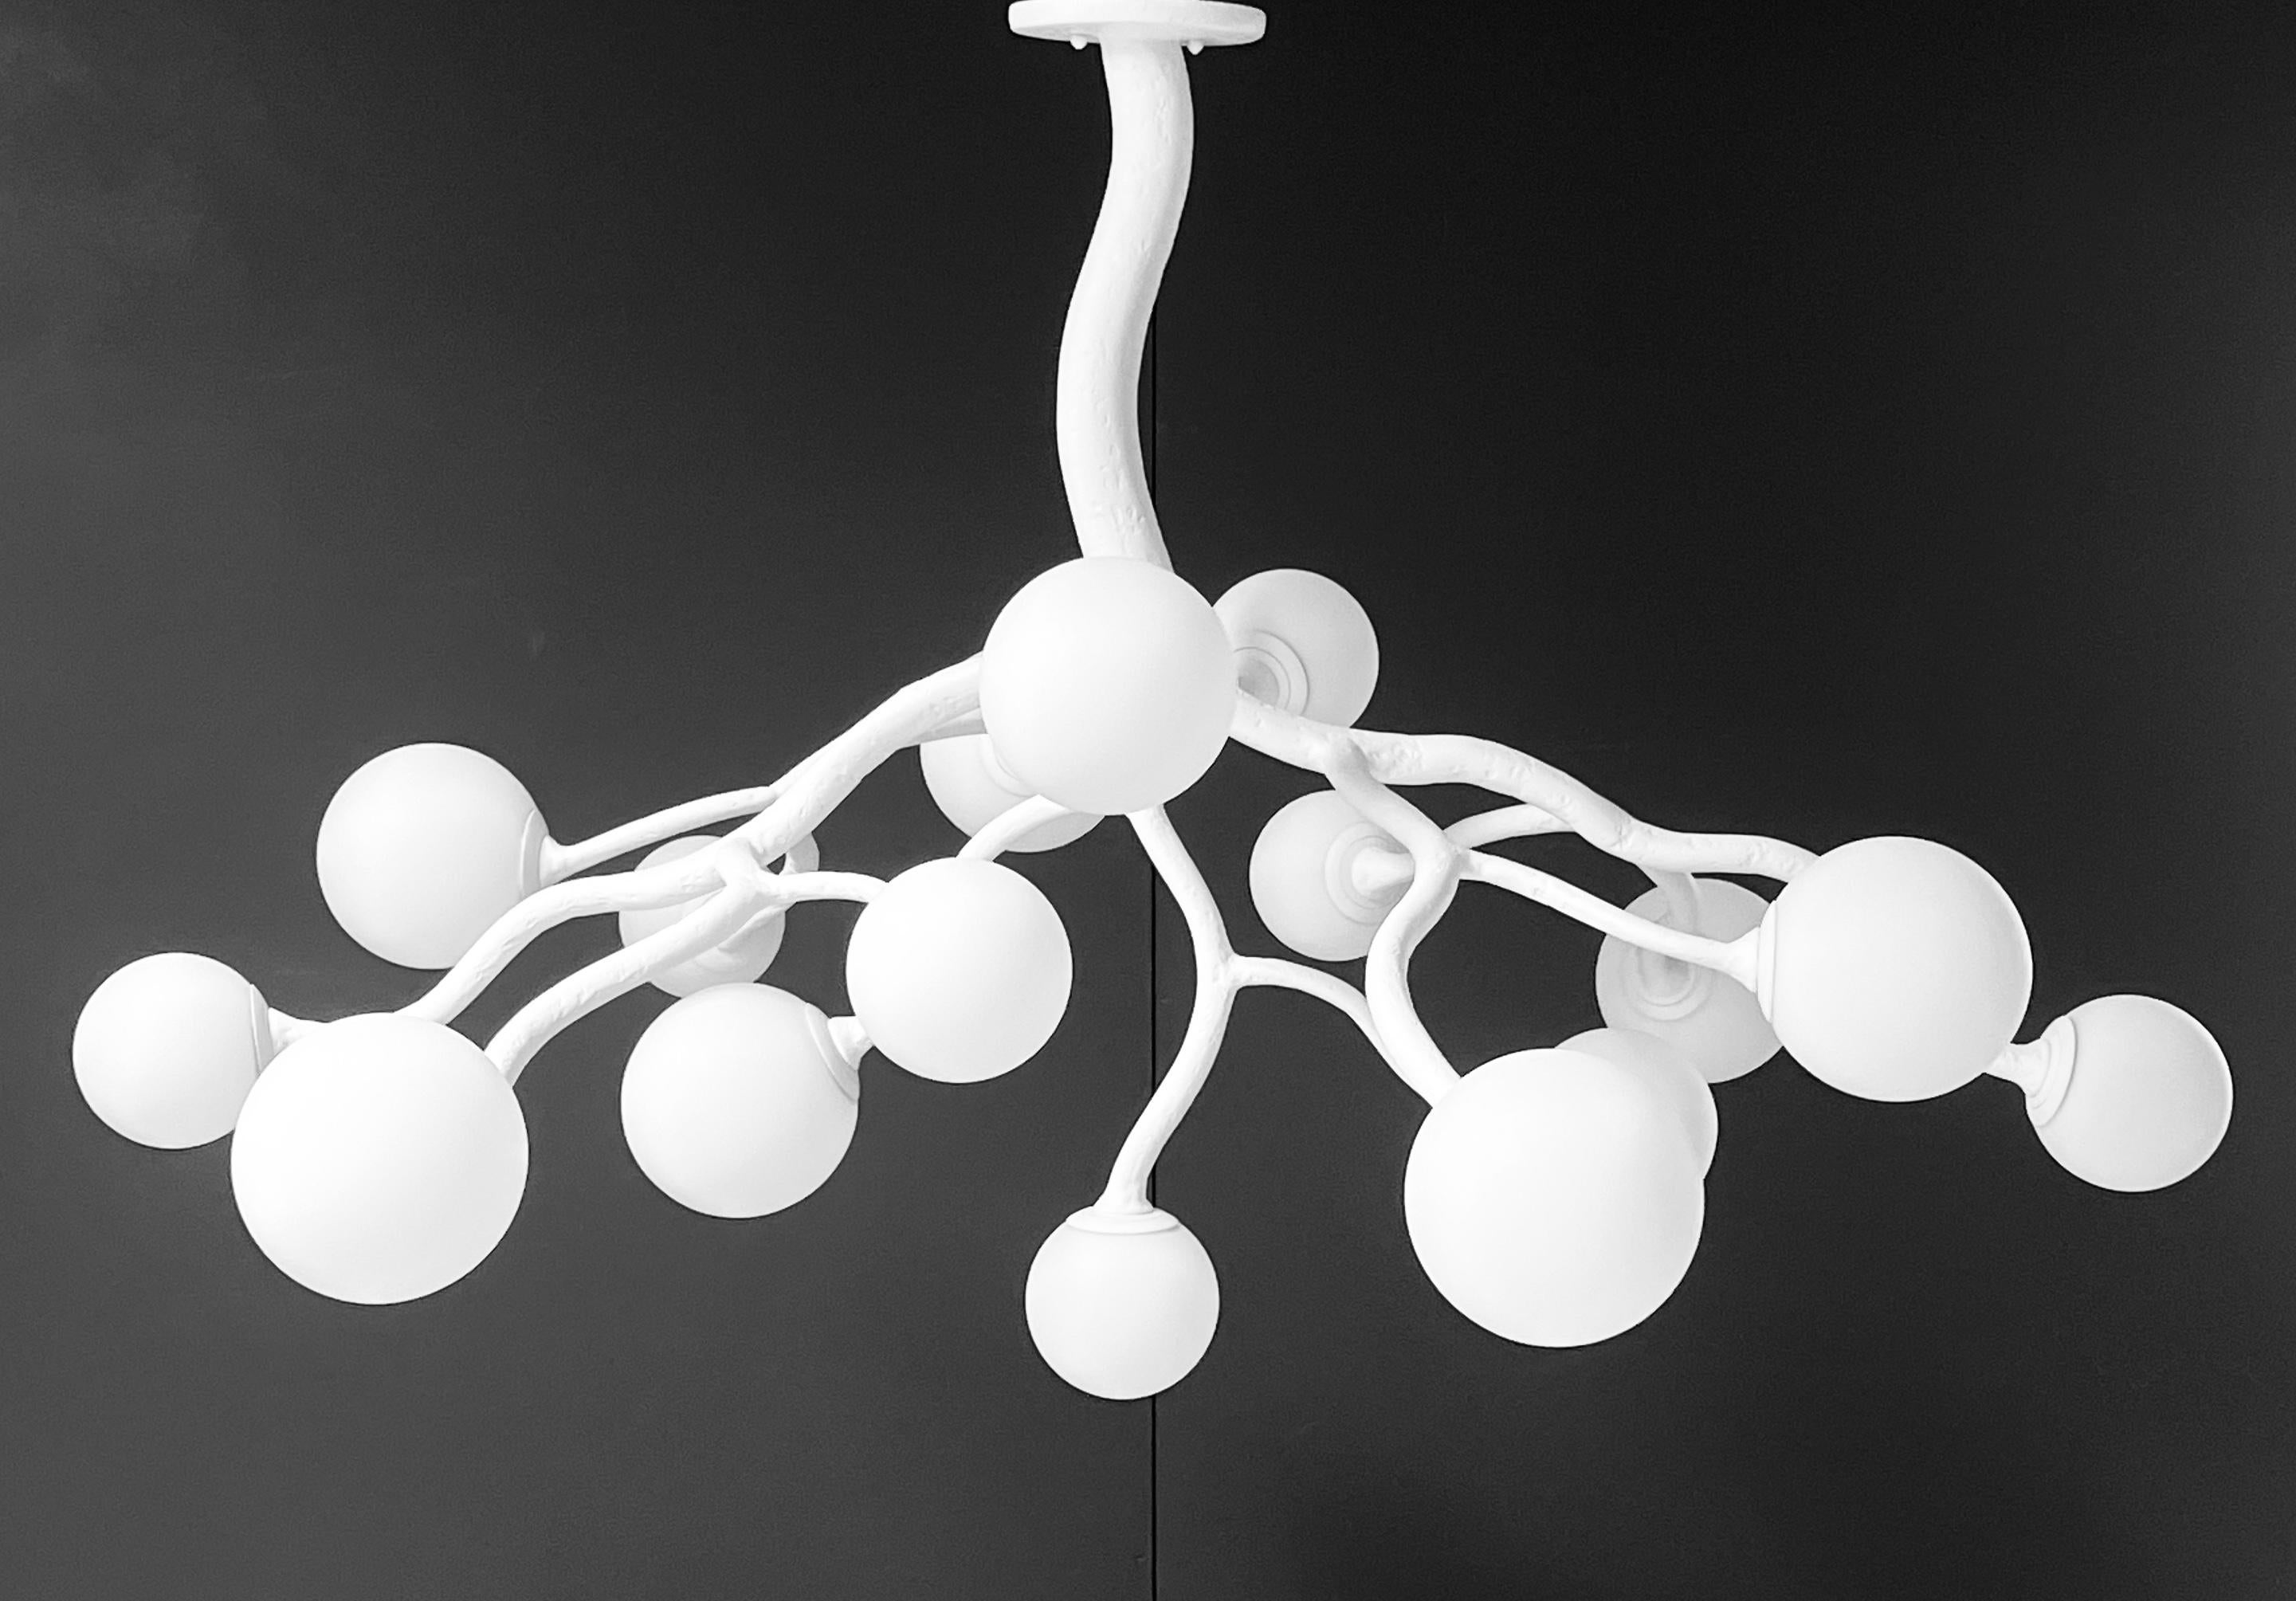 Dive into the elegance of the Republique Chandelier, an exquisite piece that embodies Parisian chic with a contemporary twist. This organic branch shaped chandelier boasts 16 radiant lights, each enclosed by an opaline glass diffusers that cast a